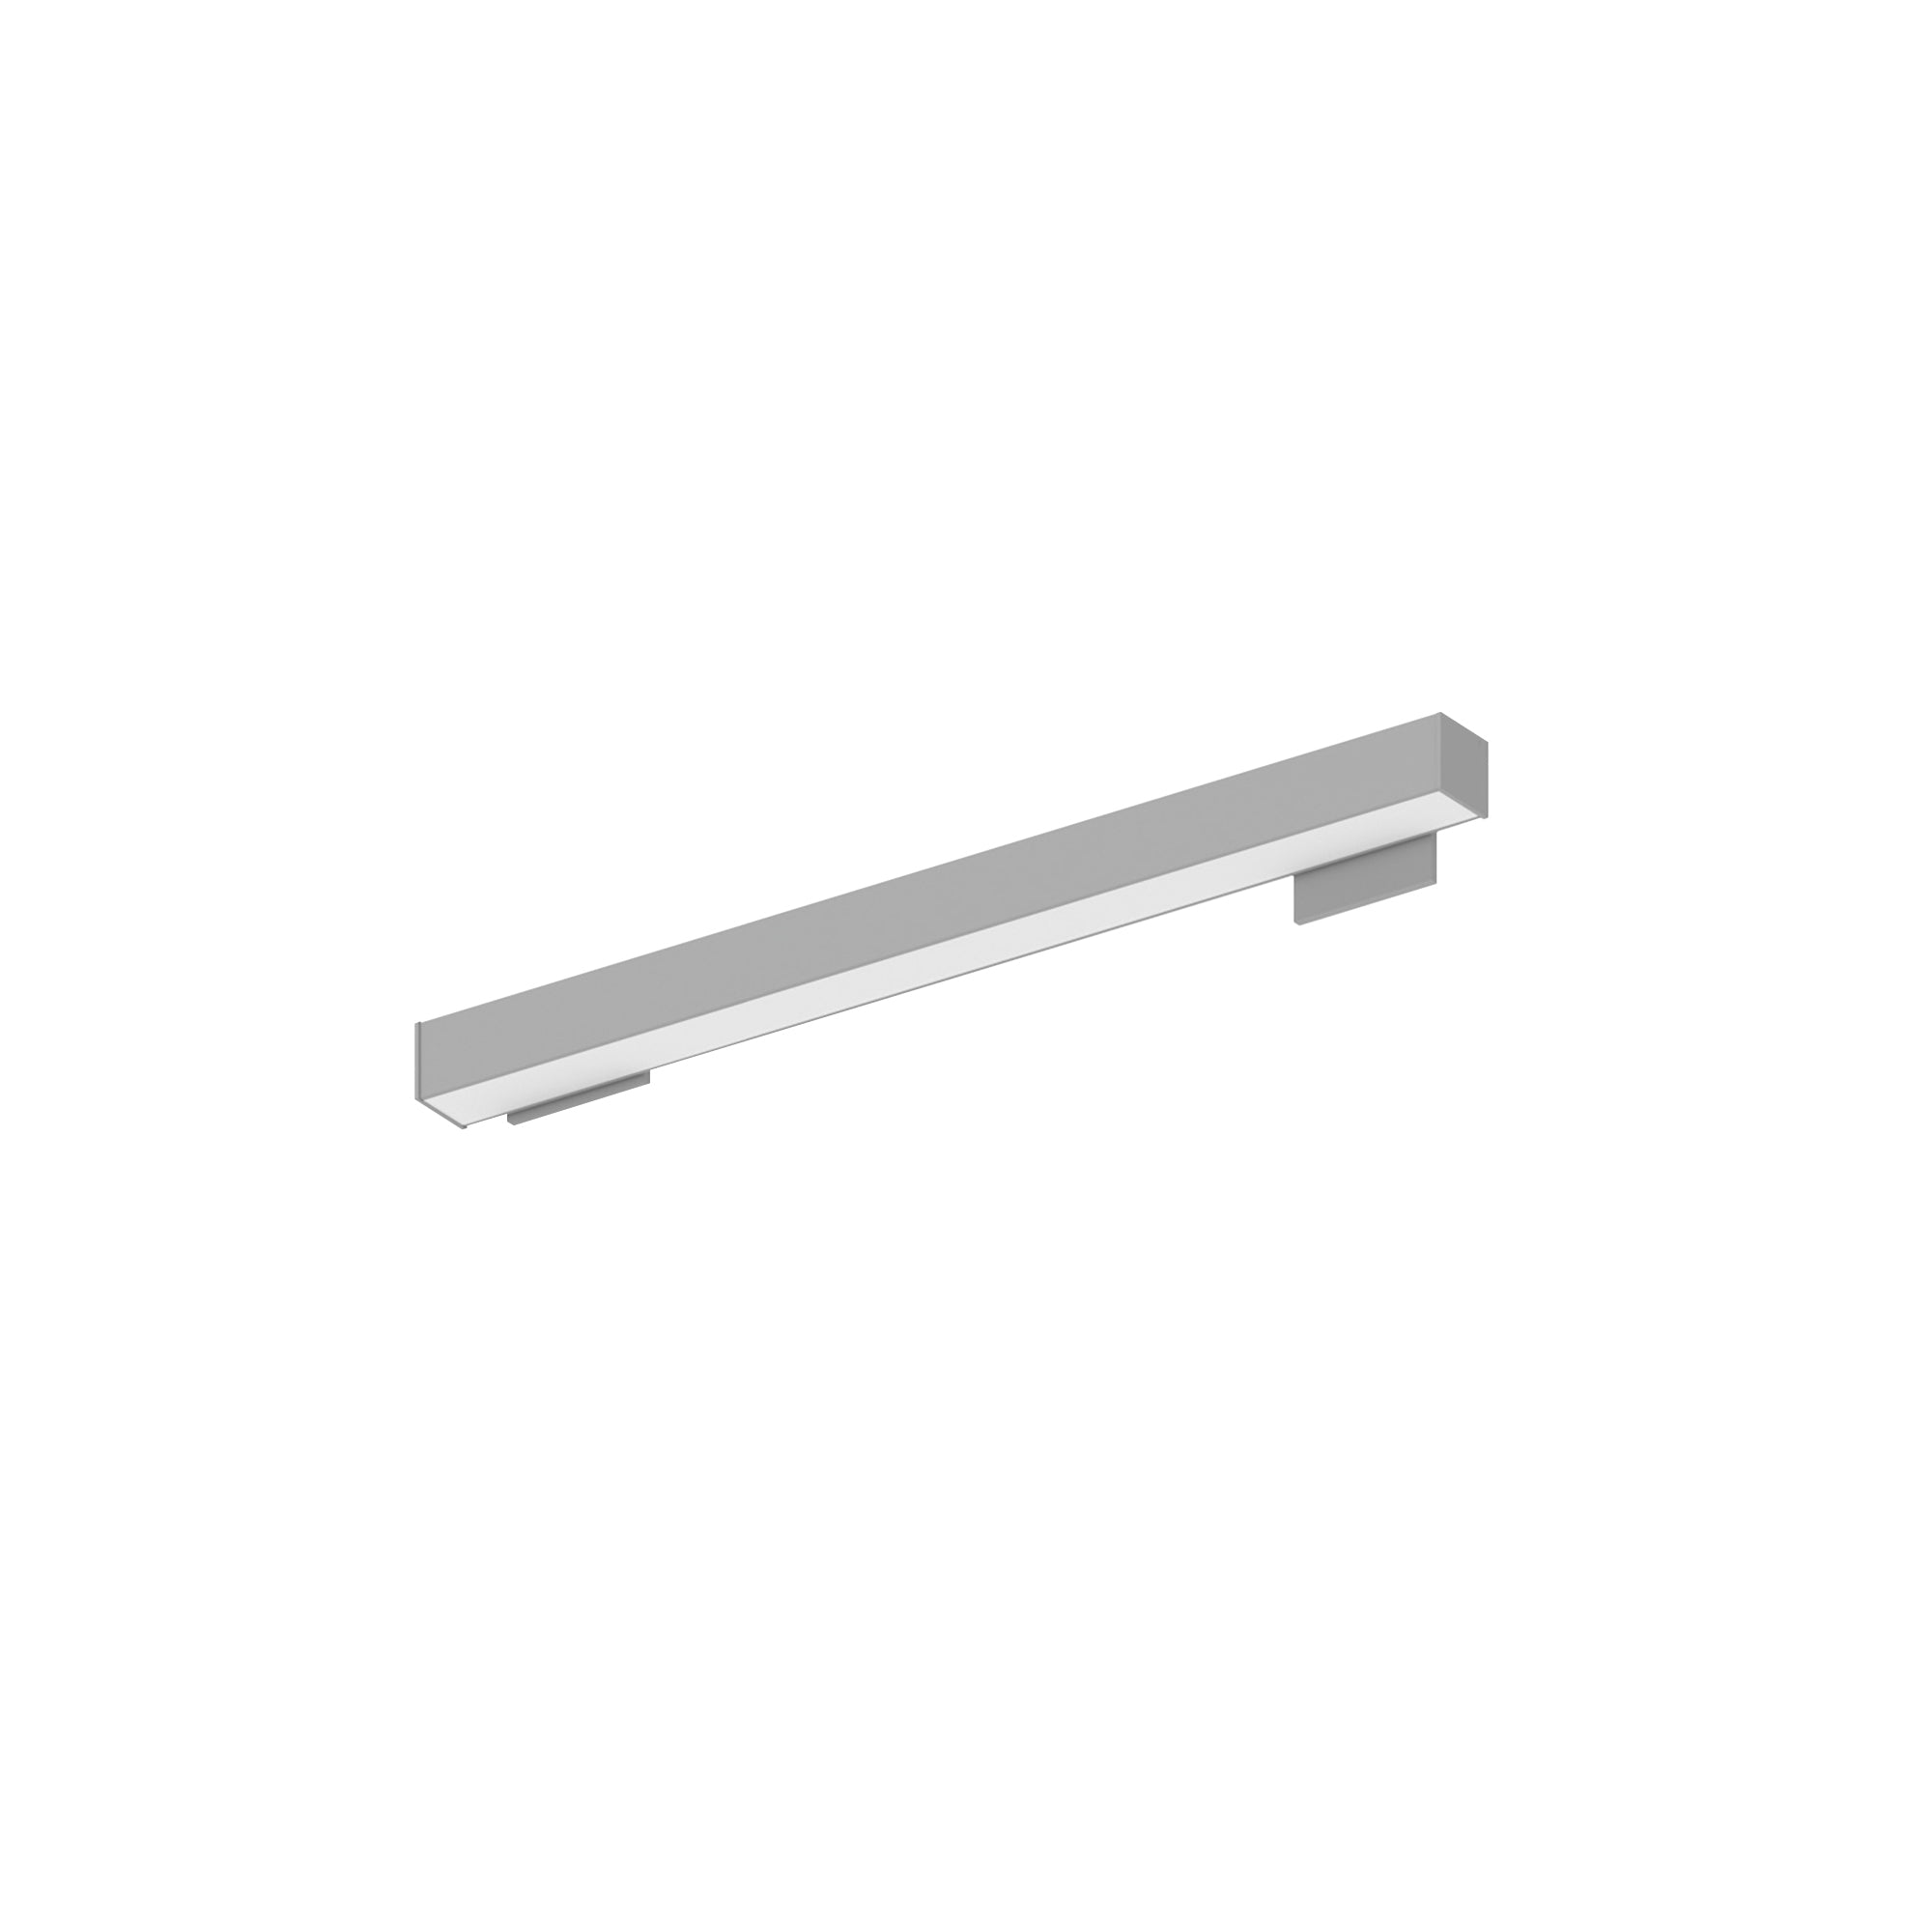 Nora Lighting NWLIN-21040A/L2P-R4 - Linear - 2' L-Line LED Wall Mount Linear, 2100lm / 4000K, 2 Inchx4 Inch Left Plate & 4 Inchx4 Inch Right Plate, Left Power Feed, Aluminum Finish